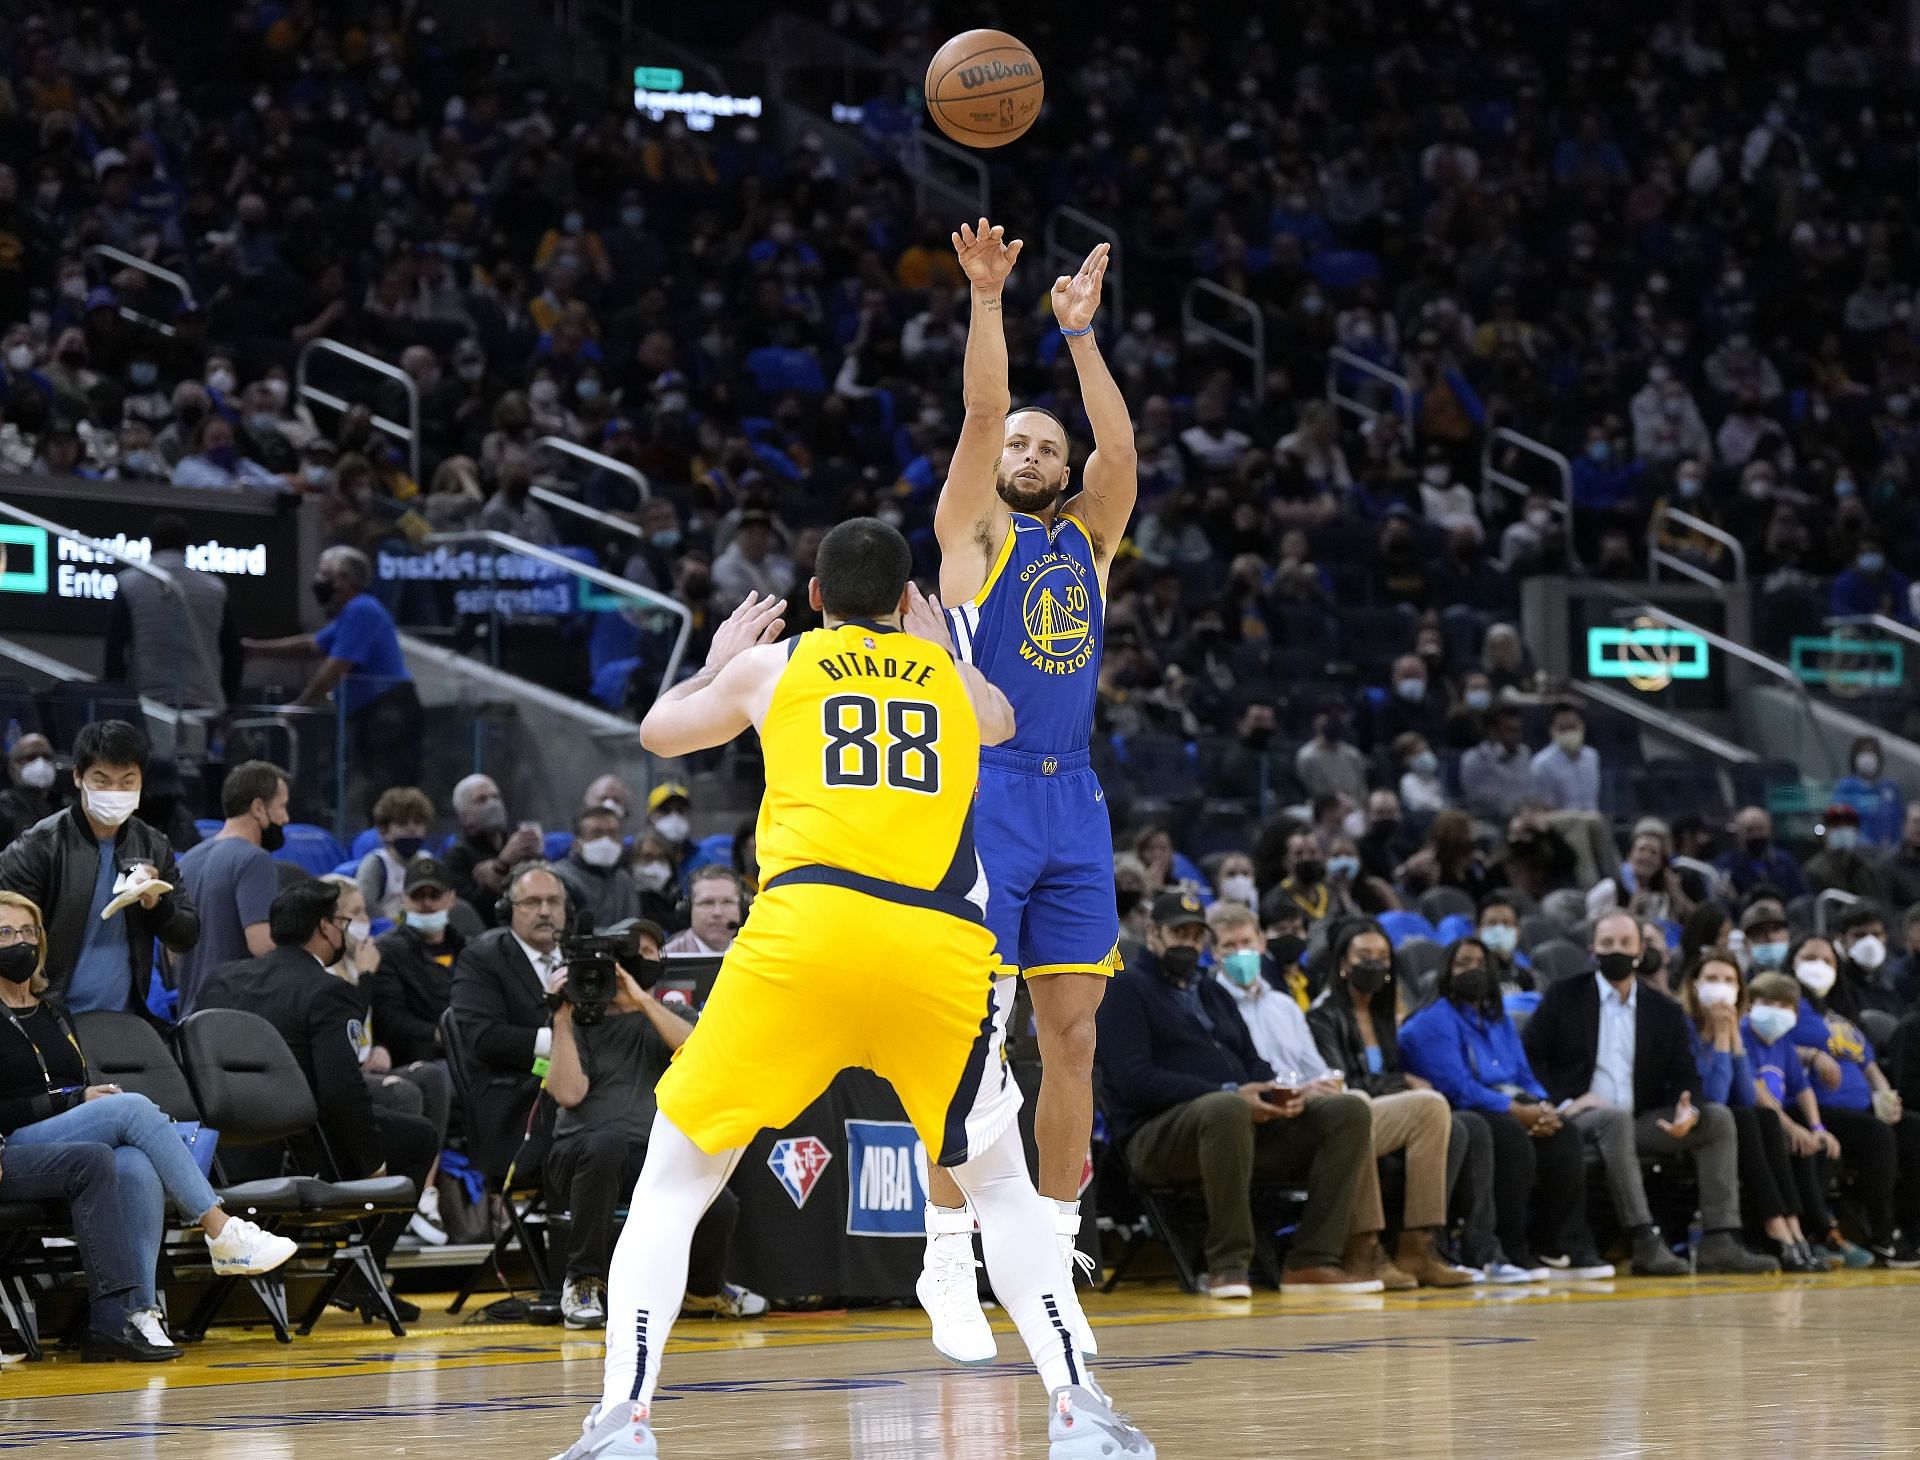 Steph Curry attempts a three-pointer against the Indiana Pacers